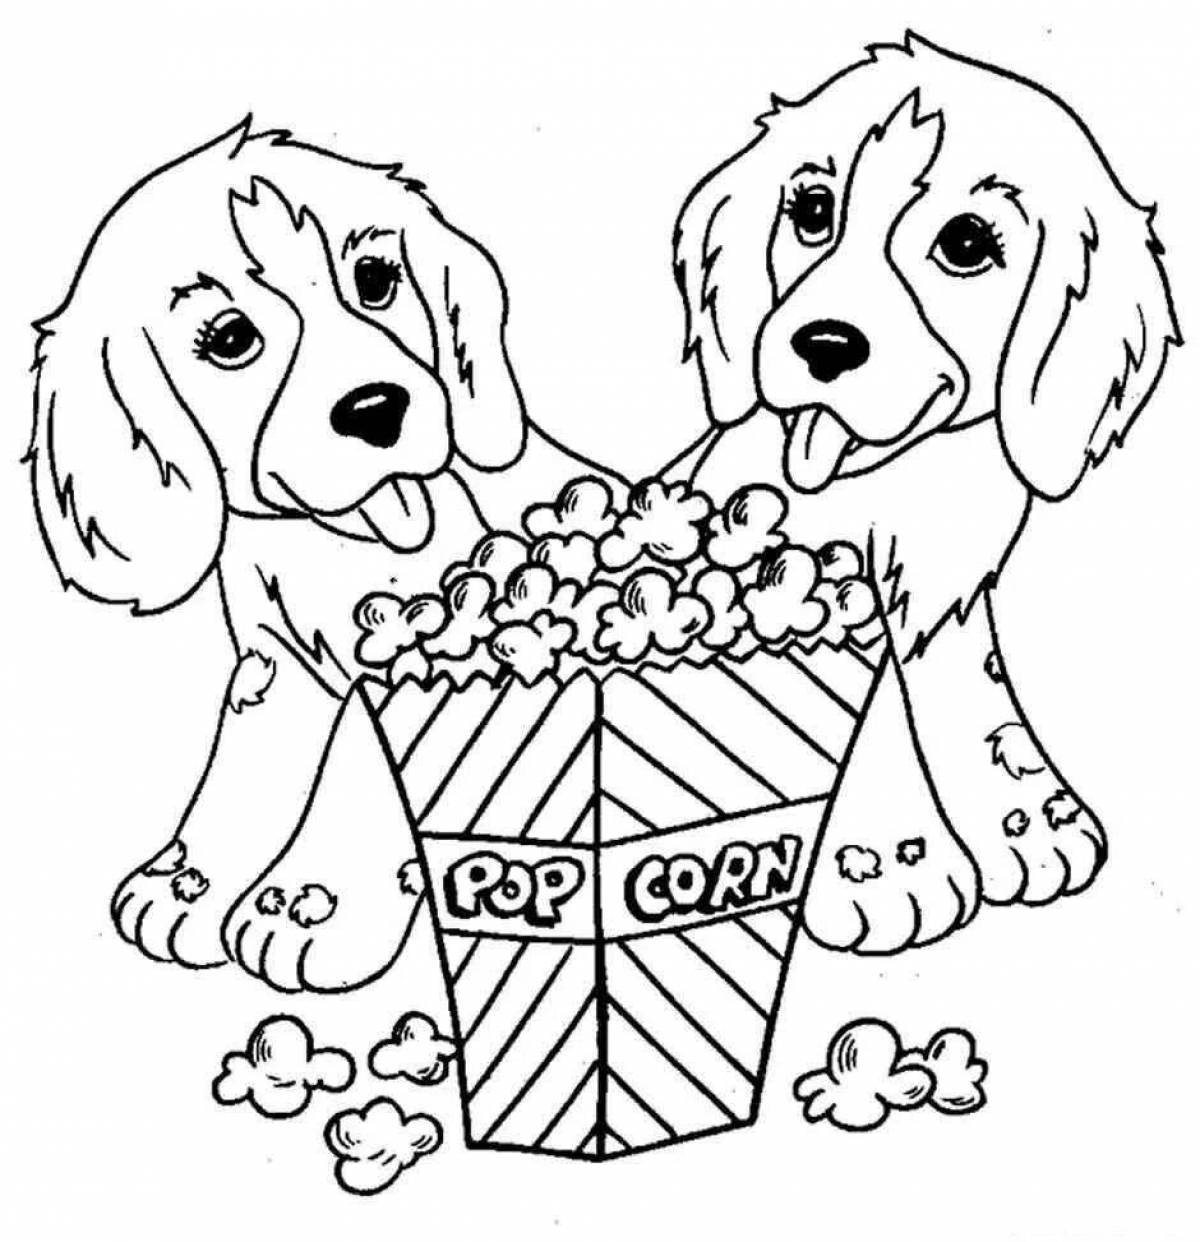 Cute dog coloring book for 7-8 year olds